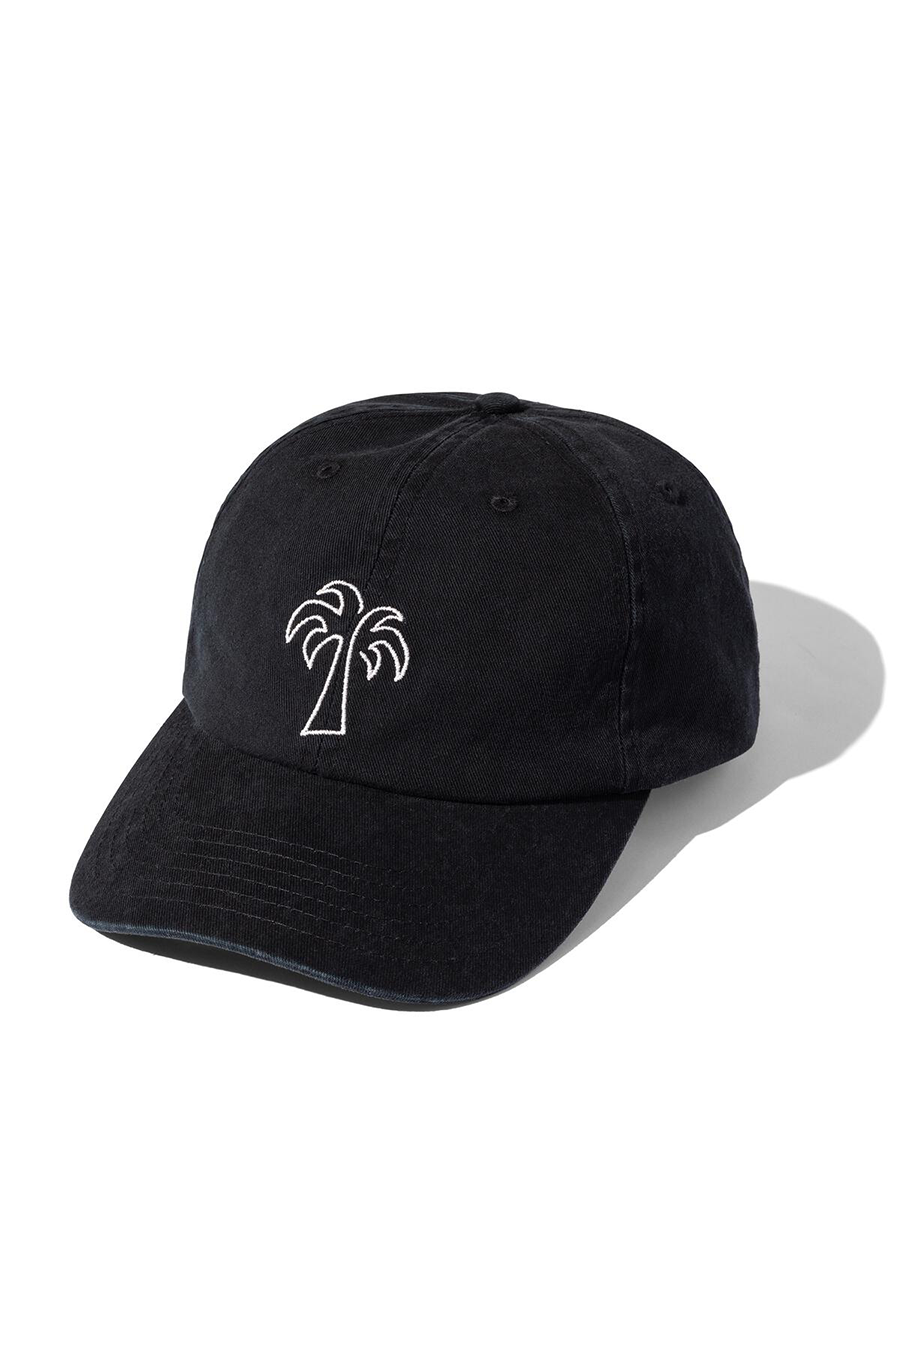 Off The Grid Hat | Dirty Black - Main Image Number 1 of 1